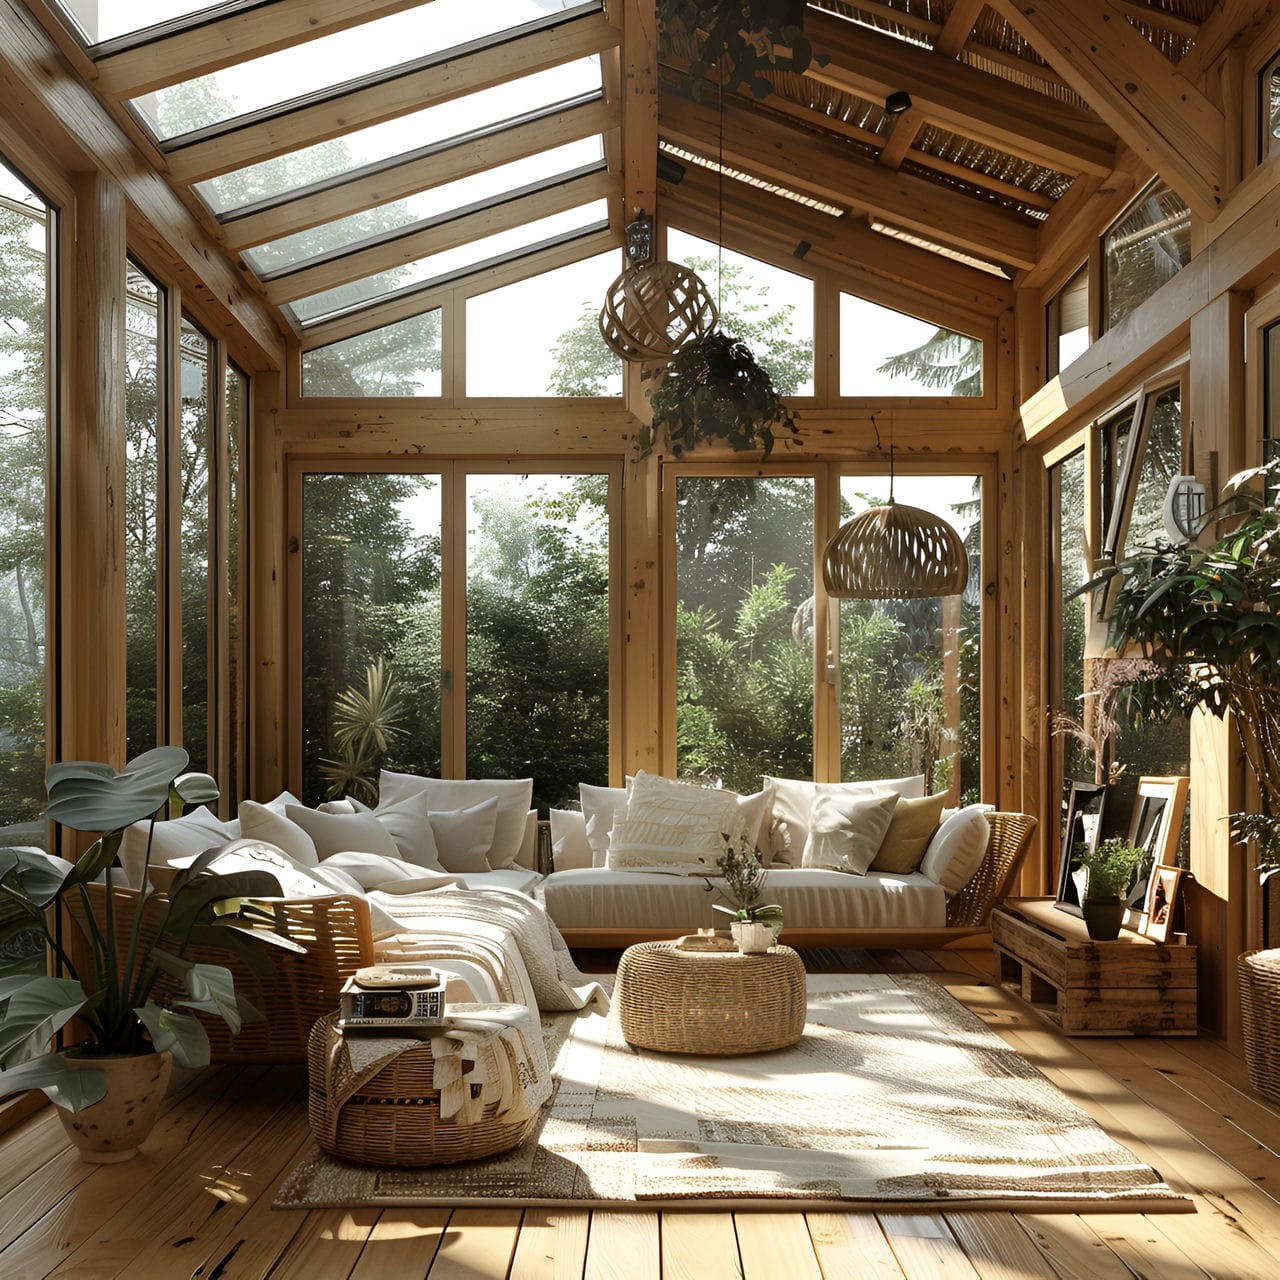 Sunroom: size, functionality, uses, furniture and renovation